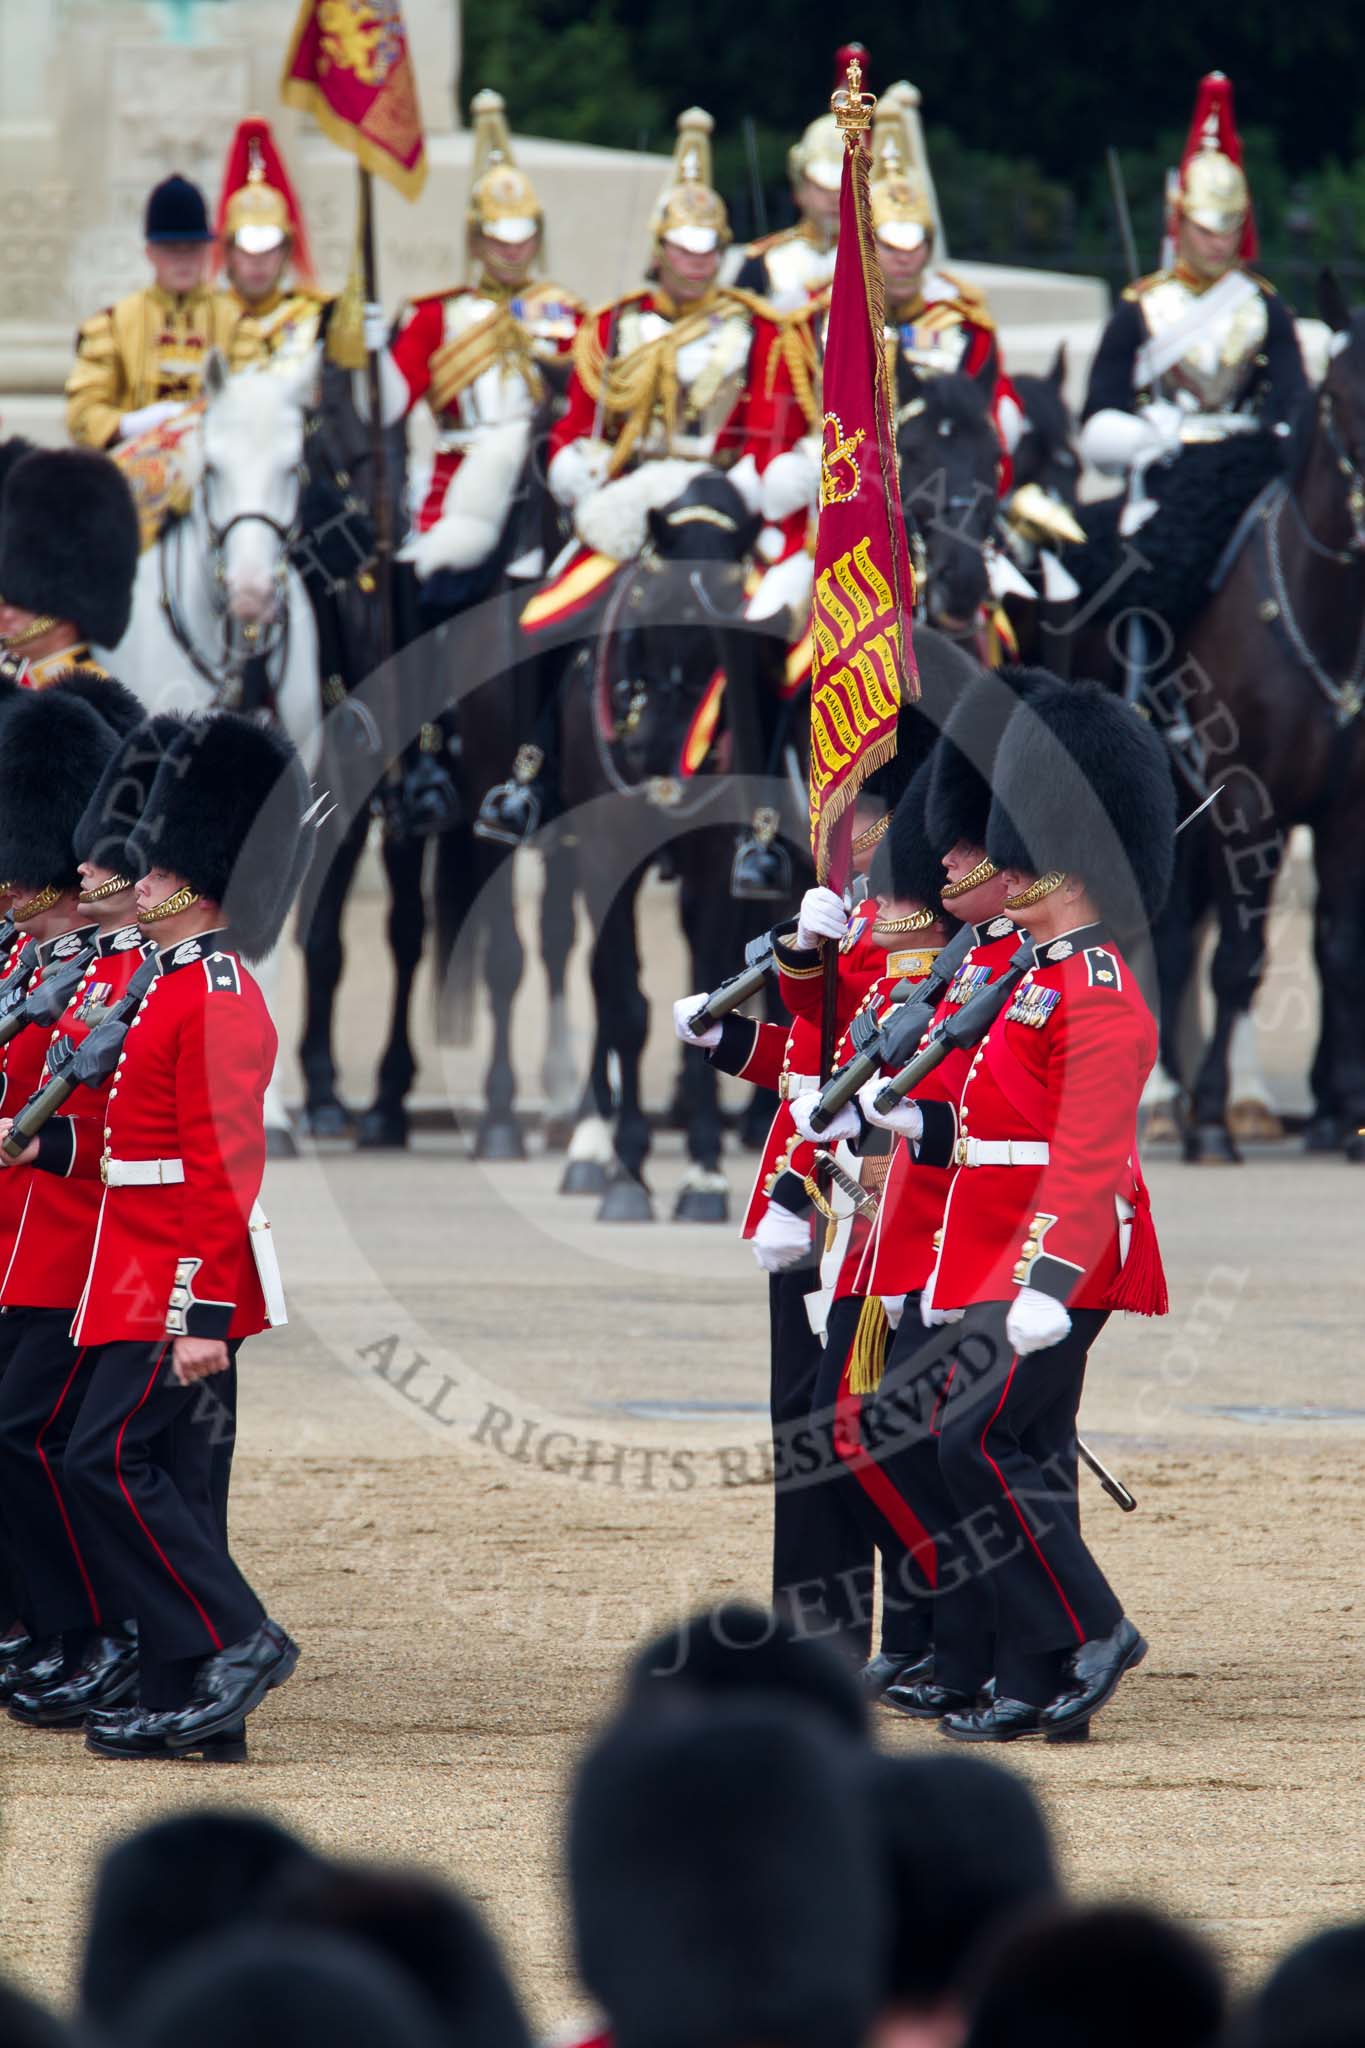 Trooping the Colour 2011: The Escort to the Colour. Carrying the flag in his white colour belt the ensign, Lieutenant Tom Ogilvy, and to his left, The Sergeant of the Ecort to the Colour, Colour Sergeant Chris Millin..
Horse Guards Parade, Westminster,
London SW1,
Greater London,
United Kingdom,
on 11 June 2011 at 11:43, image #270